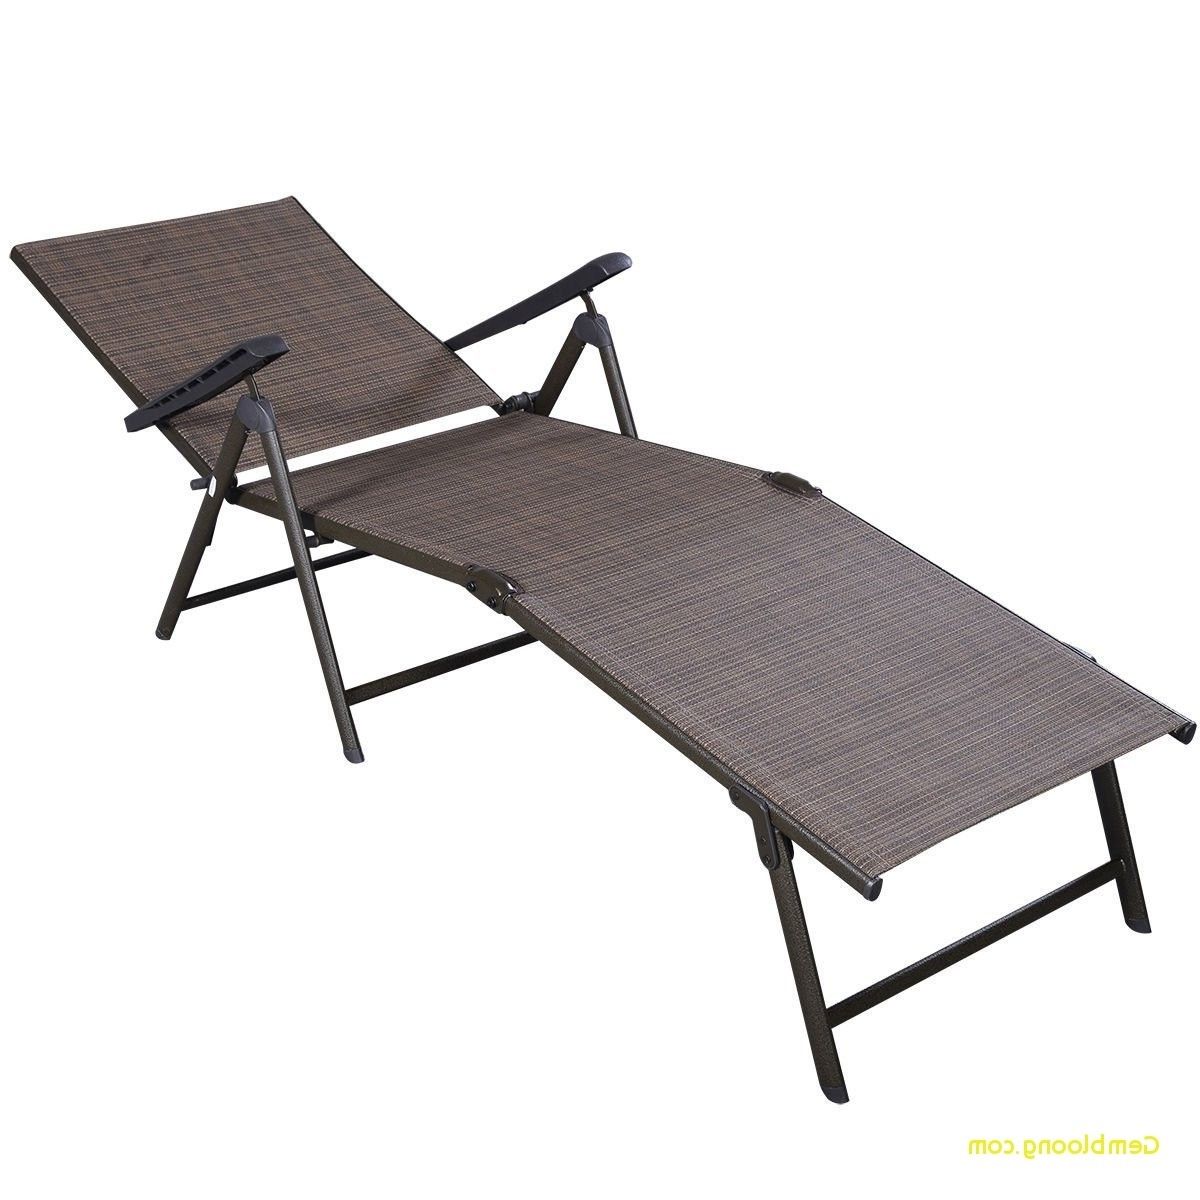 Chaise Patio Awesome Amazon Giantex Adjustable Pool Chaise Lounge Pertaining To Newest Adjustable Pool Chaise Lounge Chair Recliners (View 2 of 15)